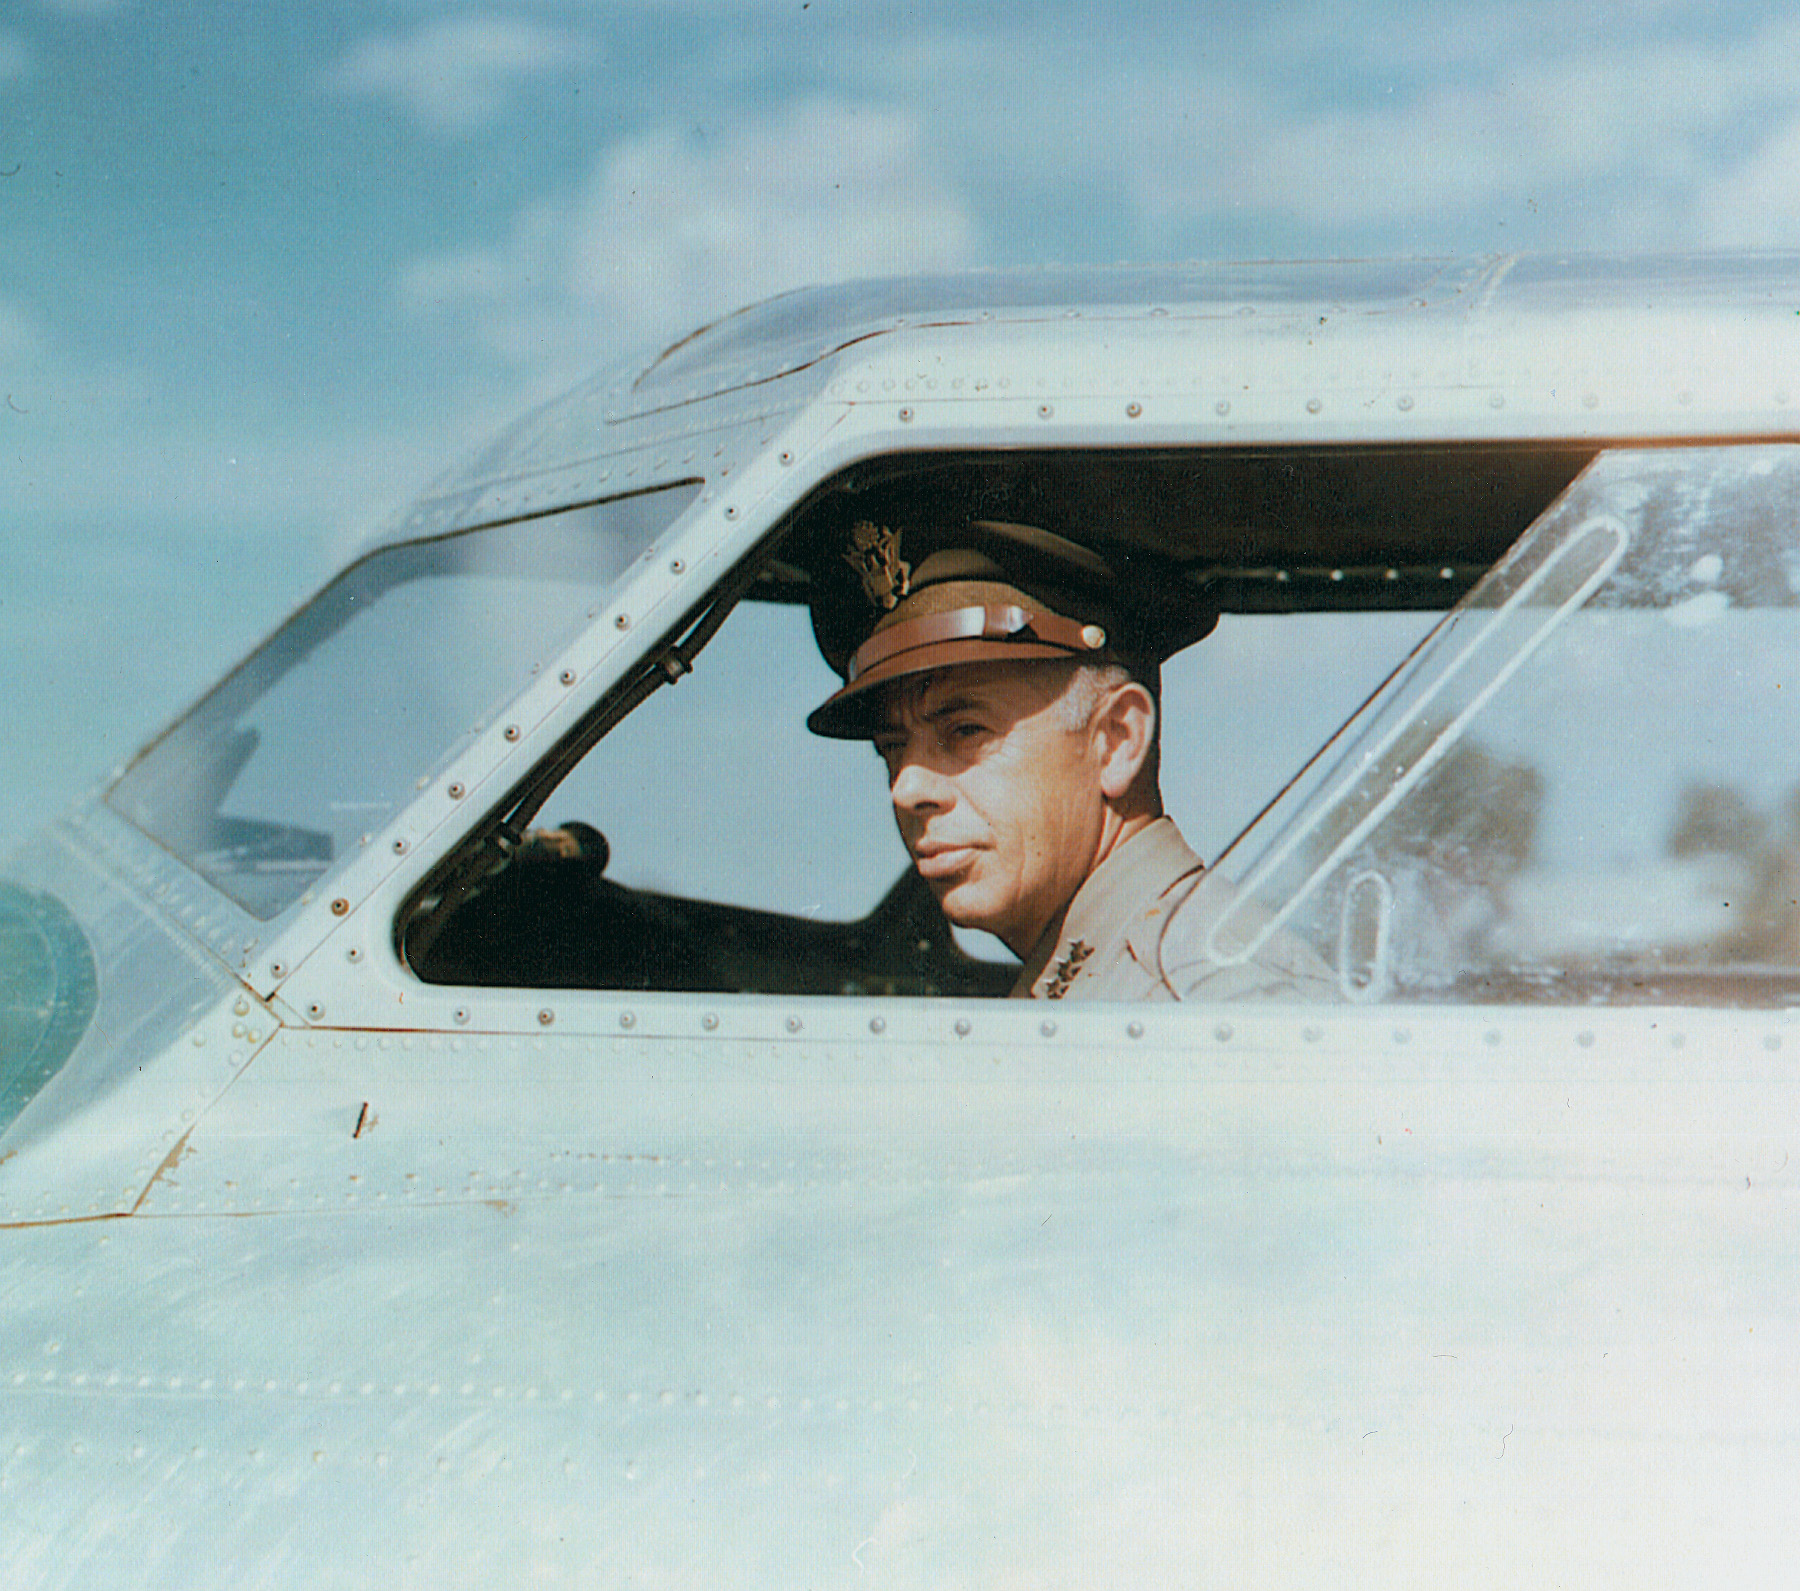 General George C. Kenney peers from the cockpit of a Boeing B-17 bomber.